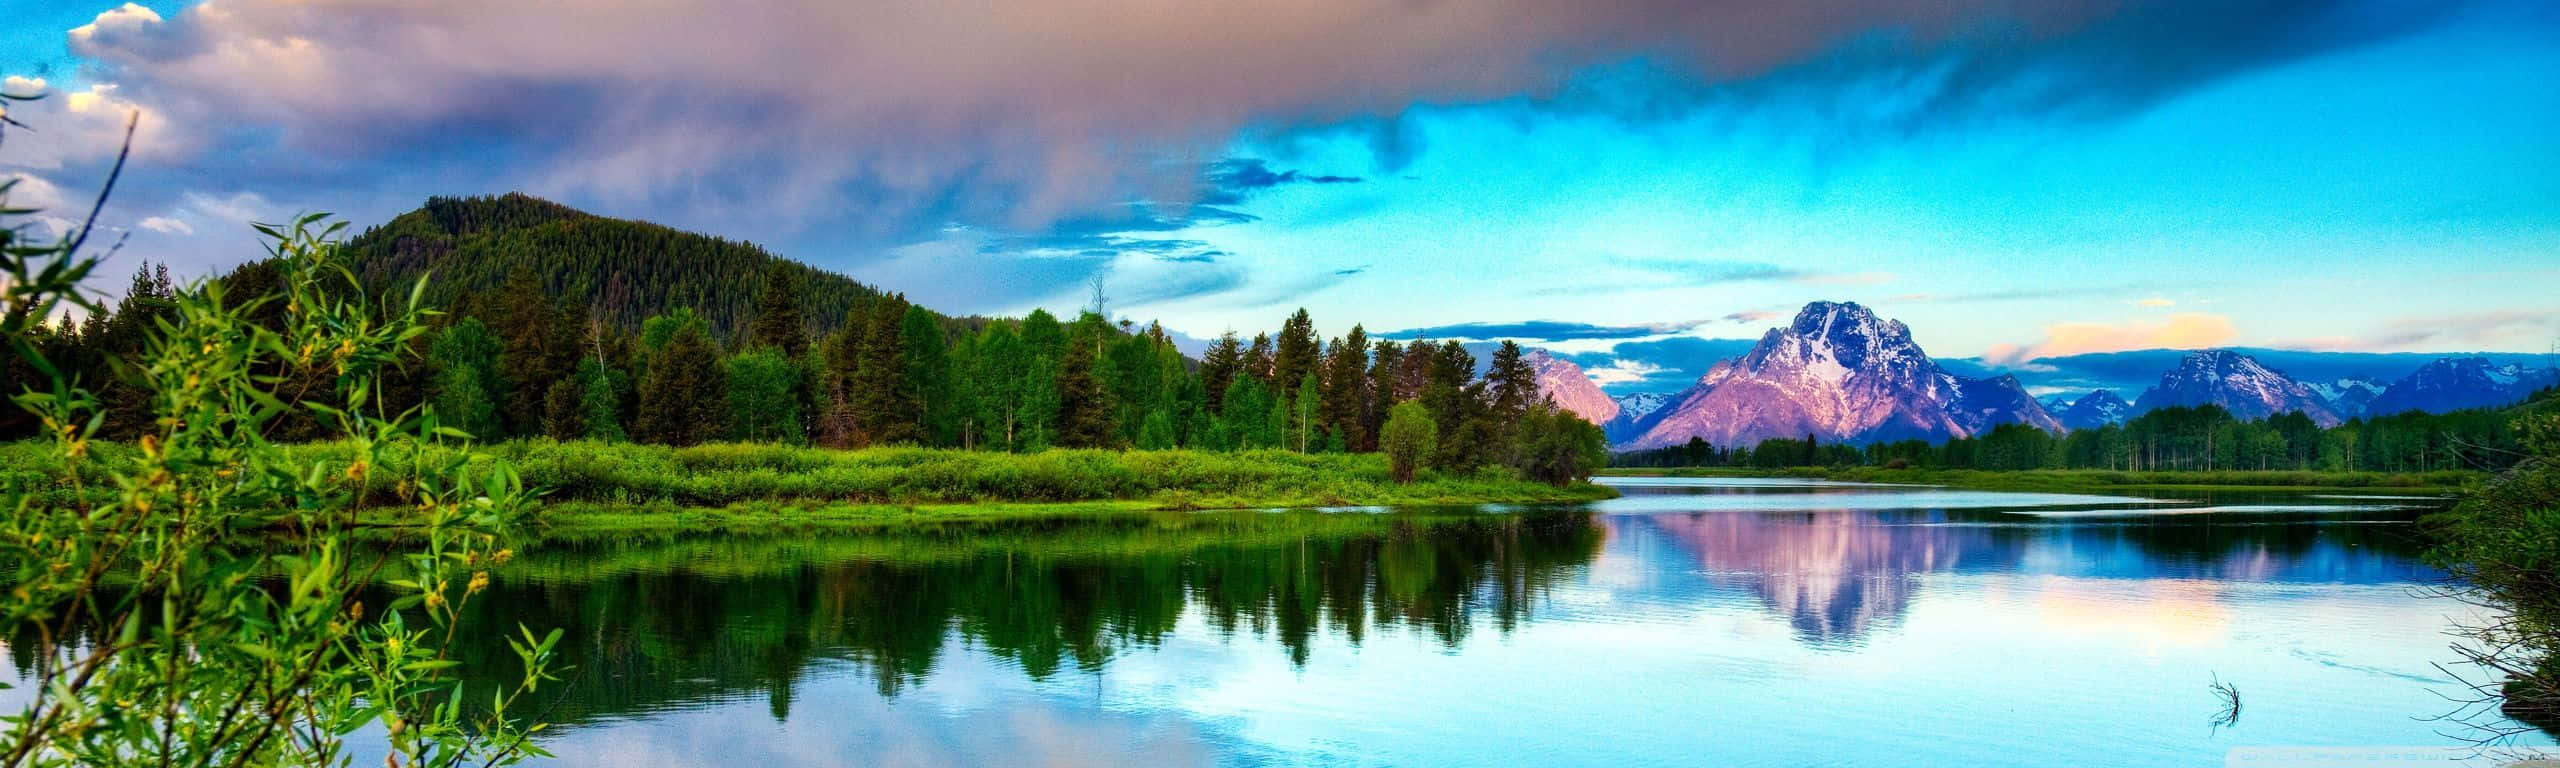 A Lake With Mountains And Clouds In The Background Wallpaper